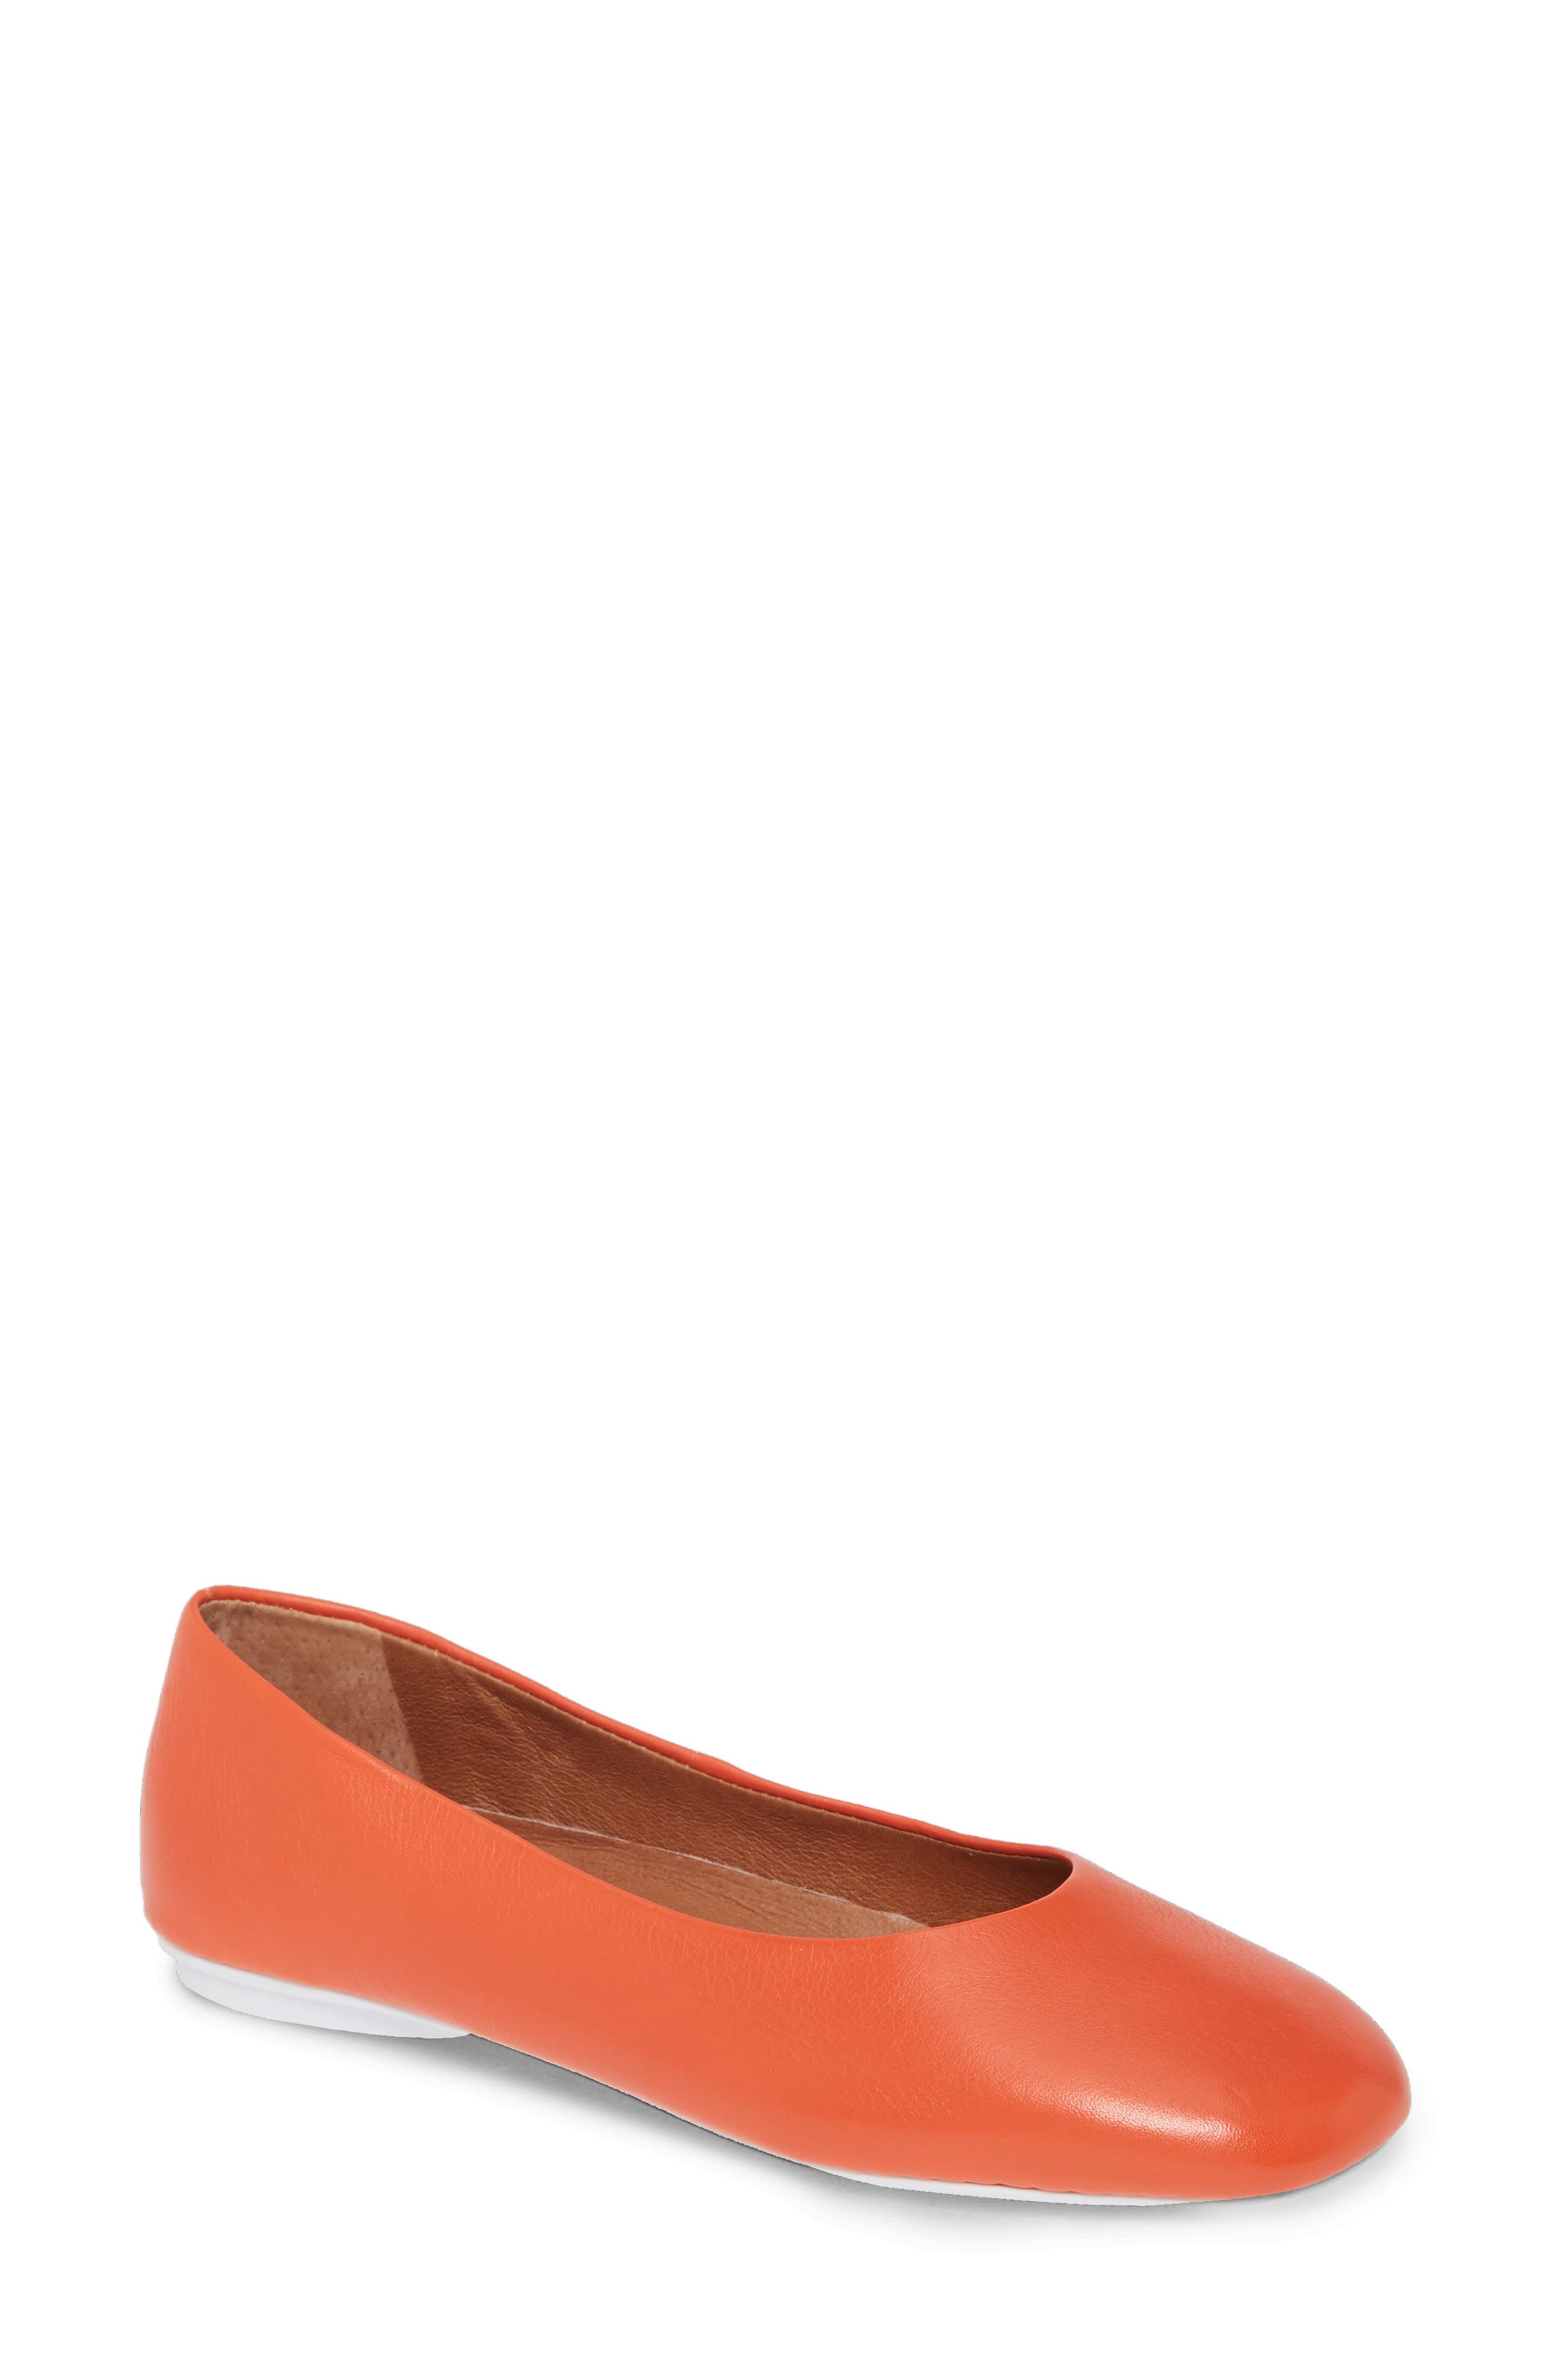 kenneth cole flat shoes